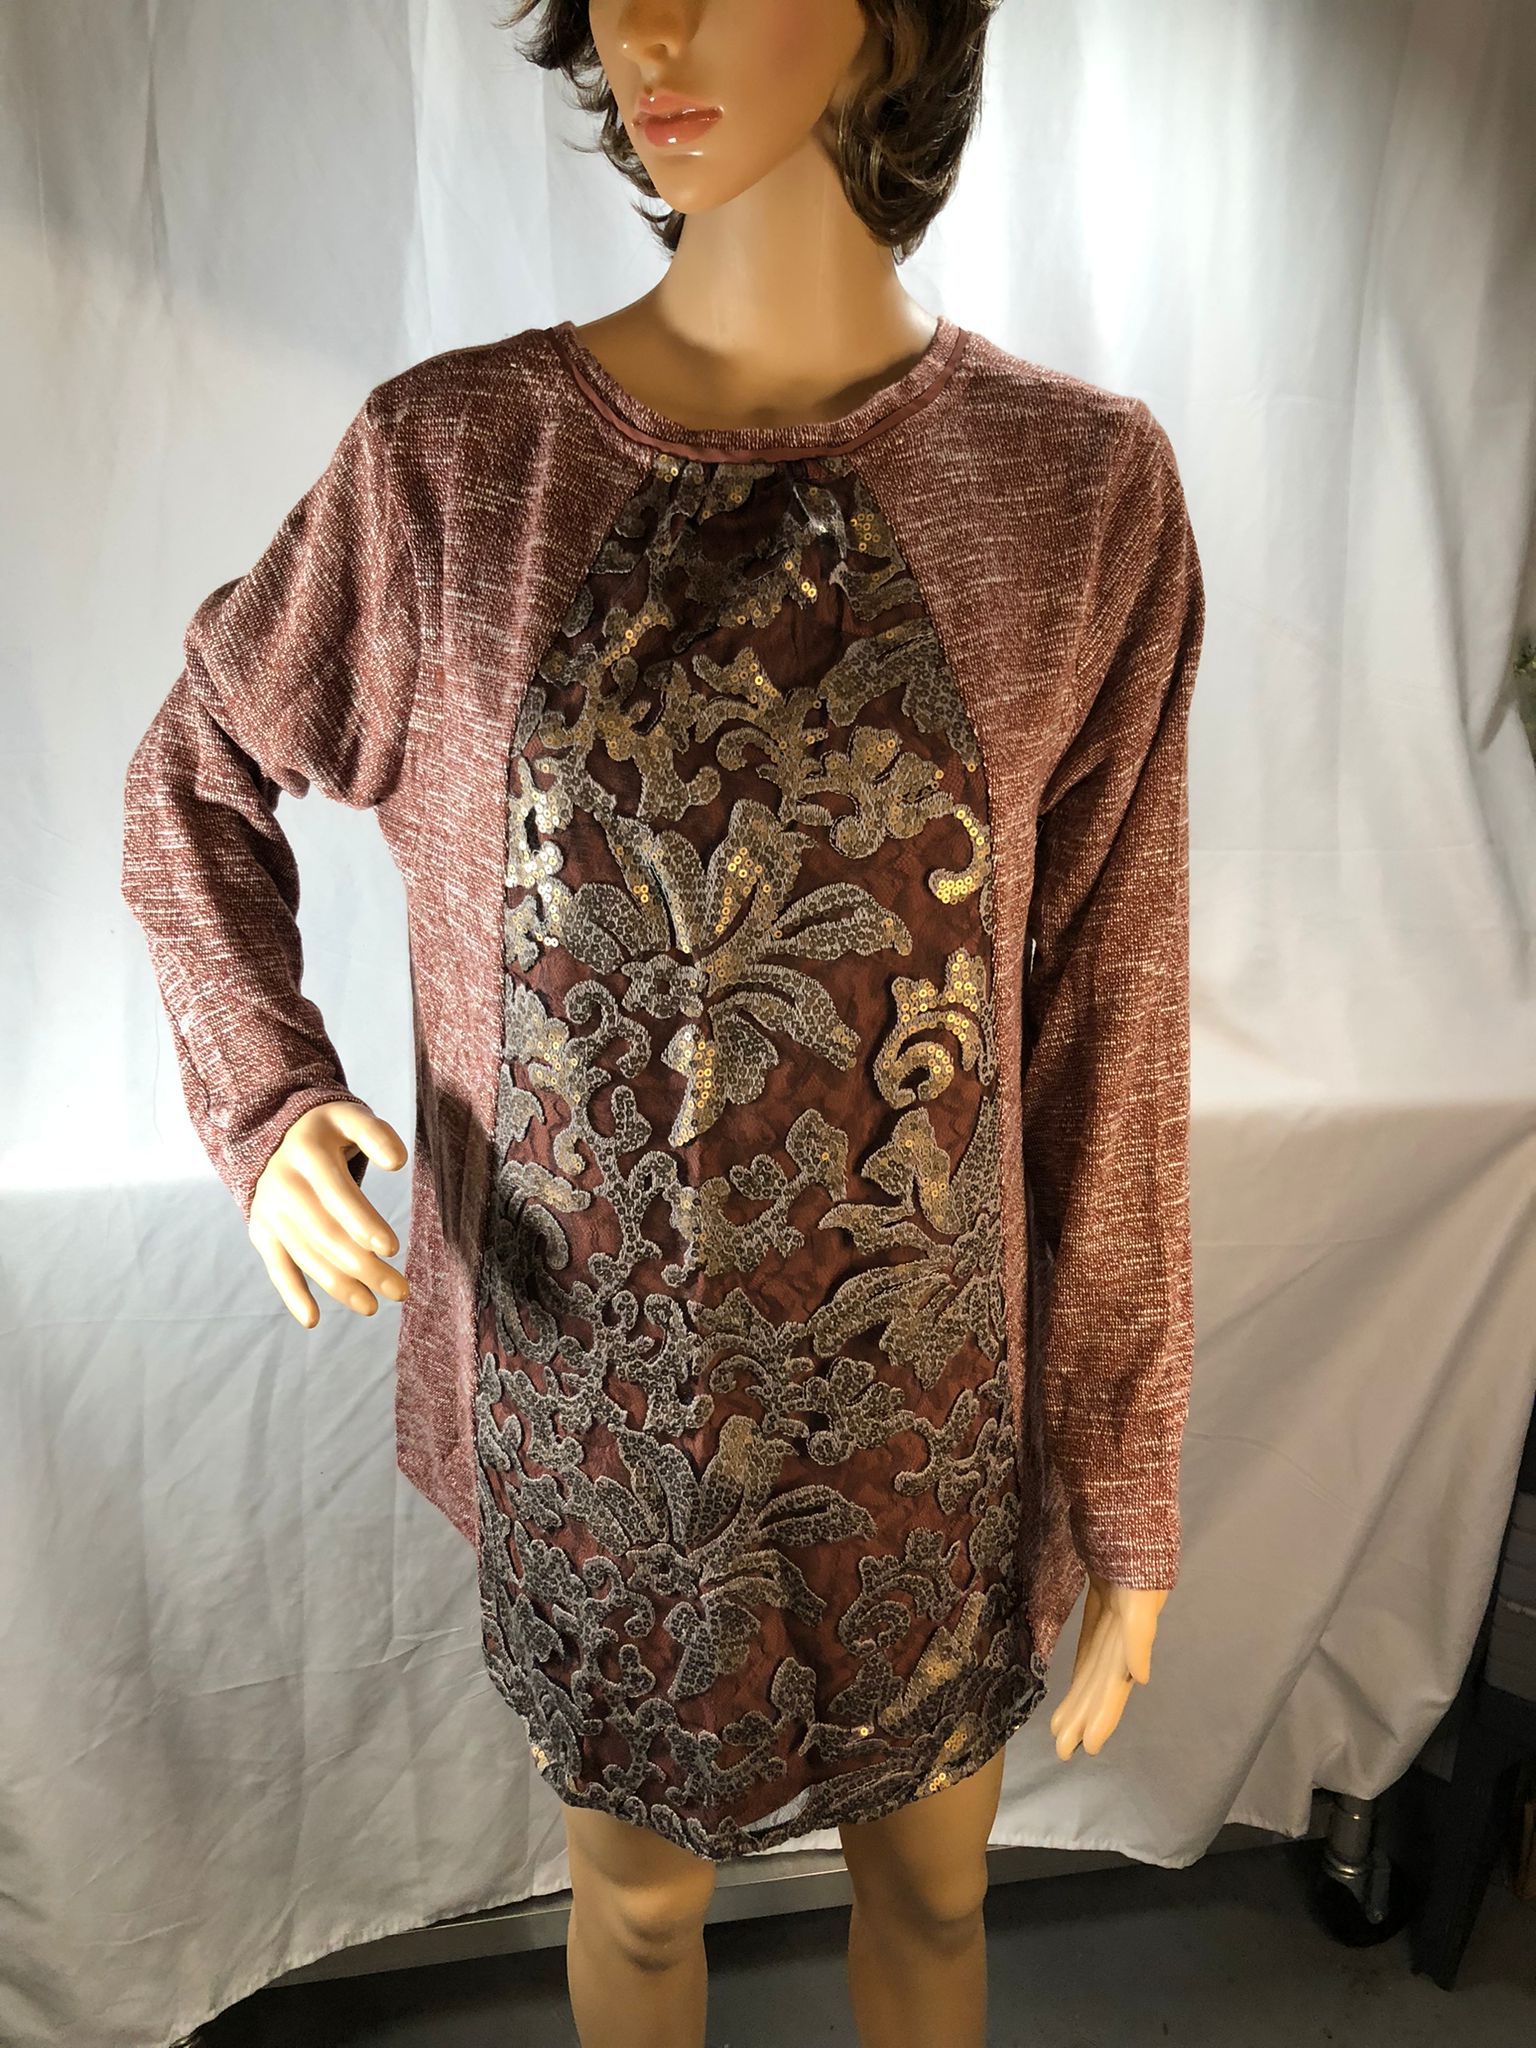 LOGO by Lori Goldstein Melange Boucle Knit Top with Embellishment